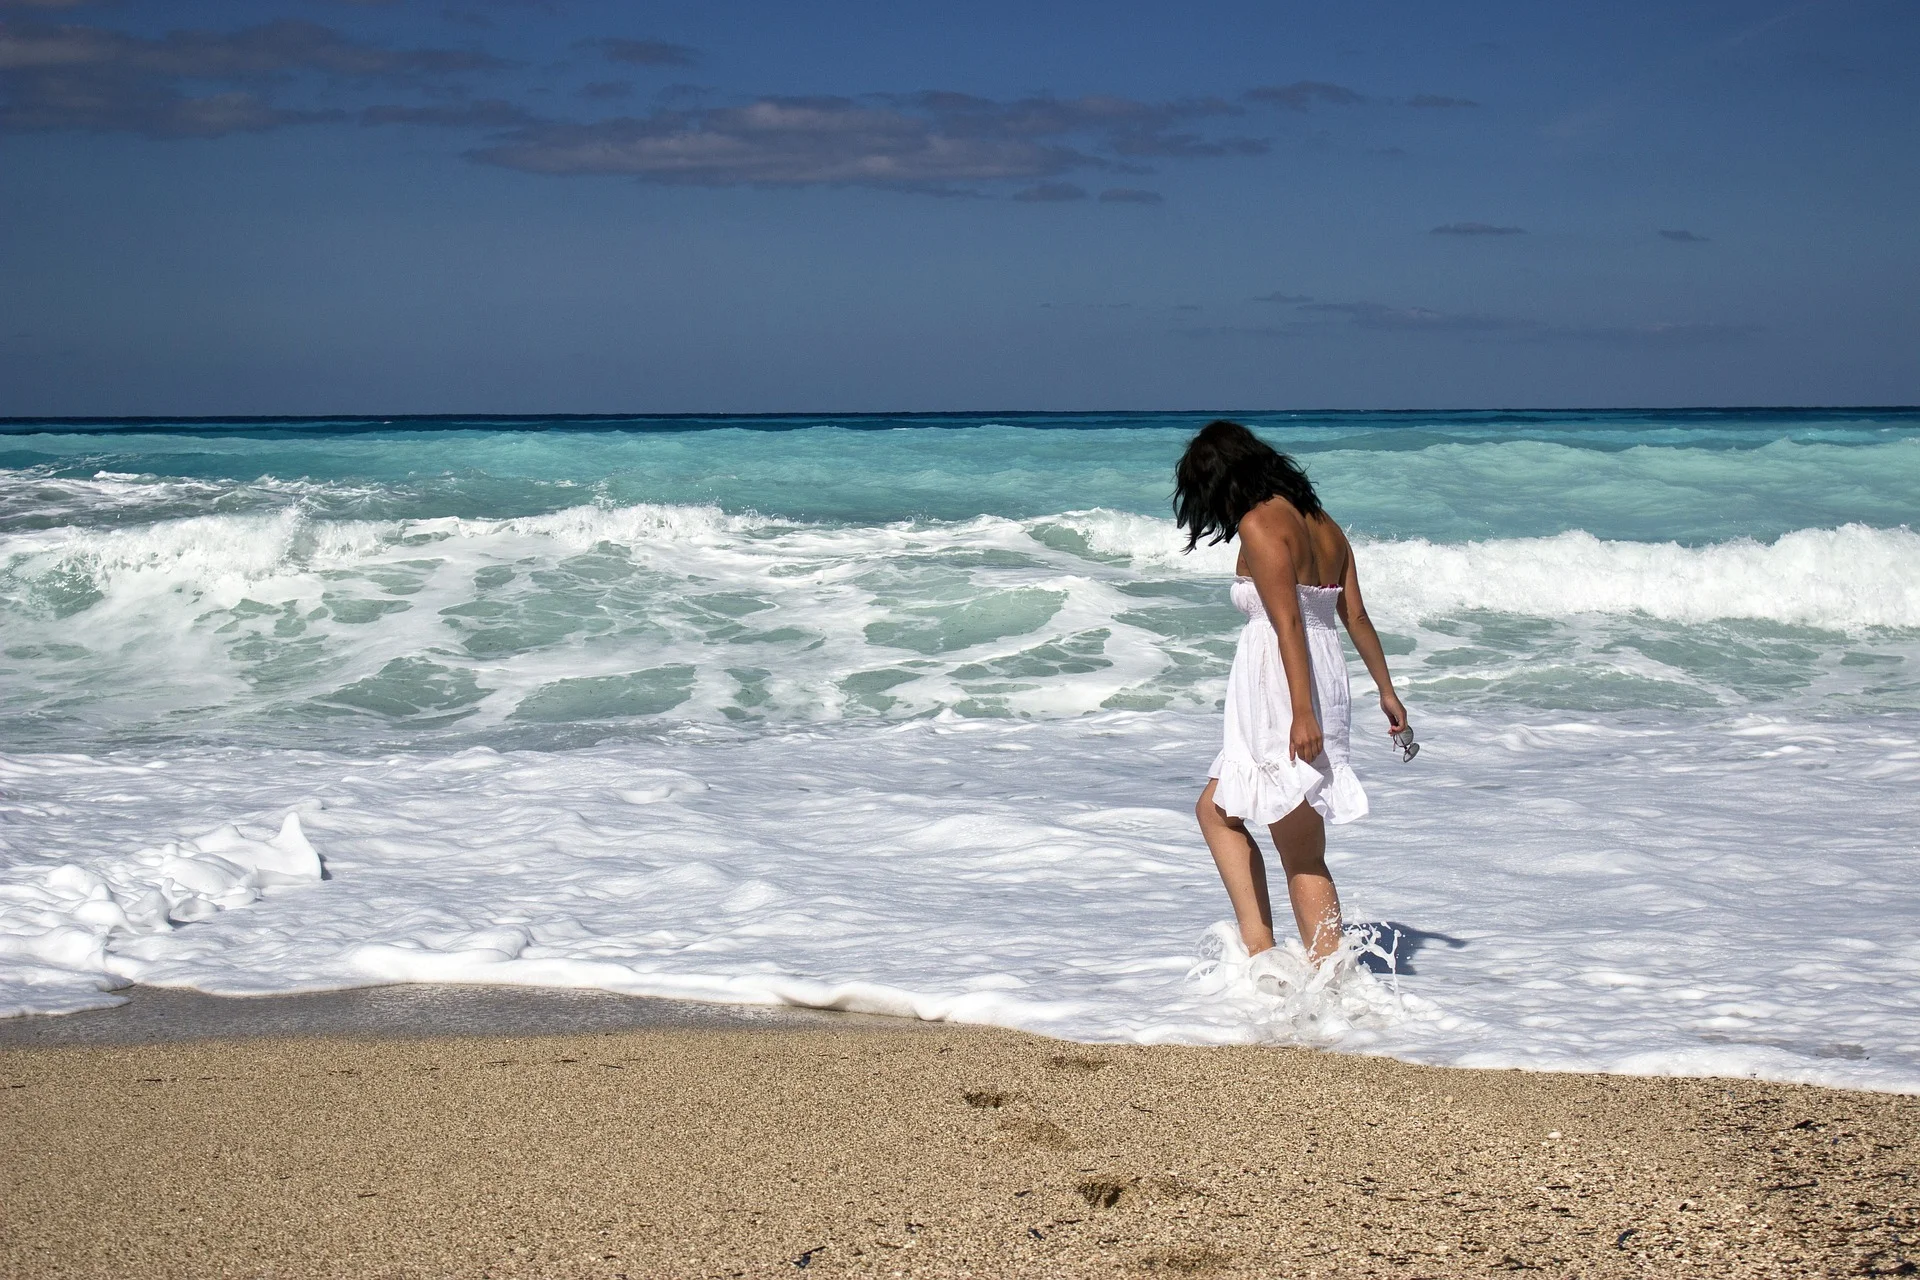 Woman walking in the surf on a beach